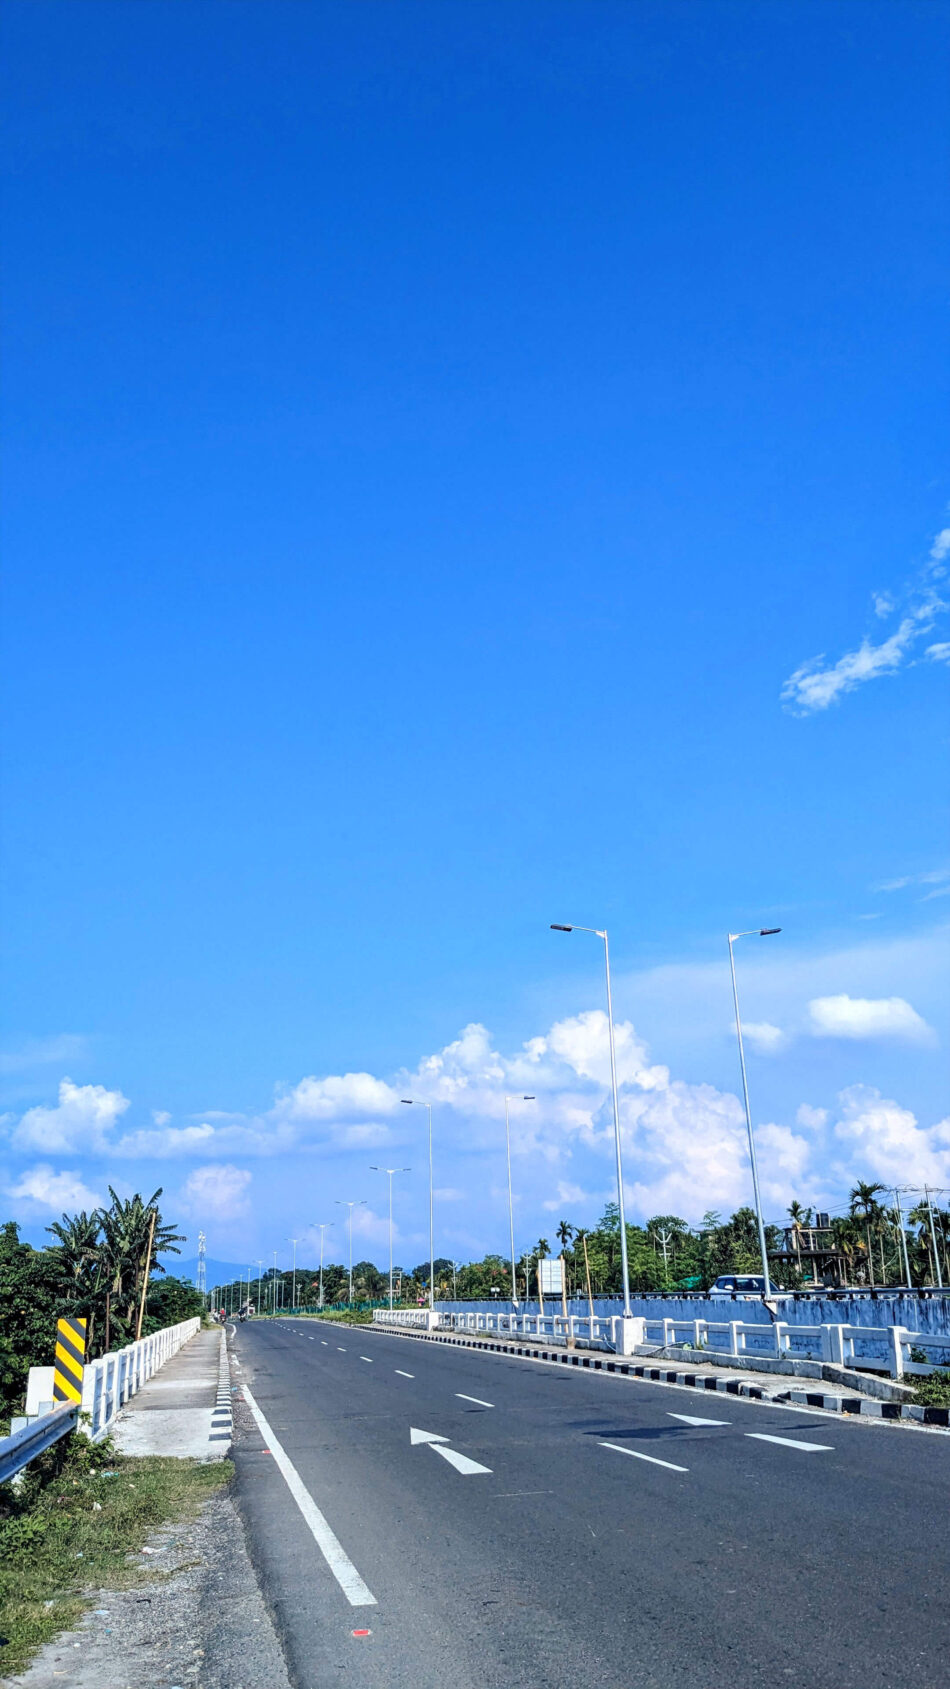 Clean Highway Sunny Day Blue Sky 4K Ultra HD Mobile Wallpaper